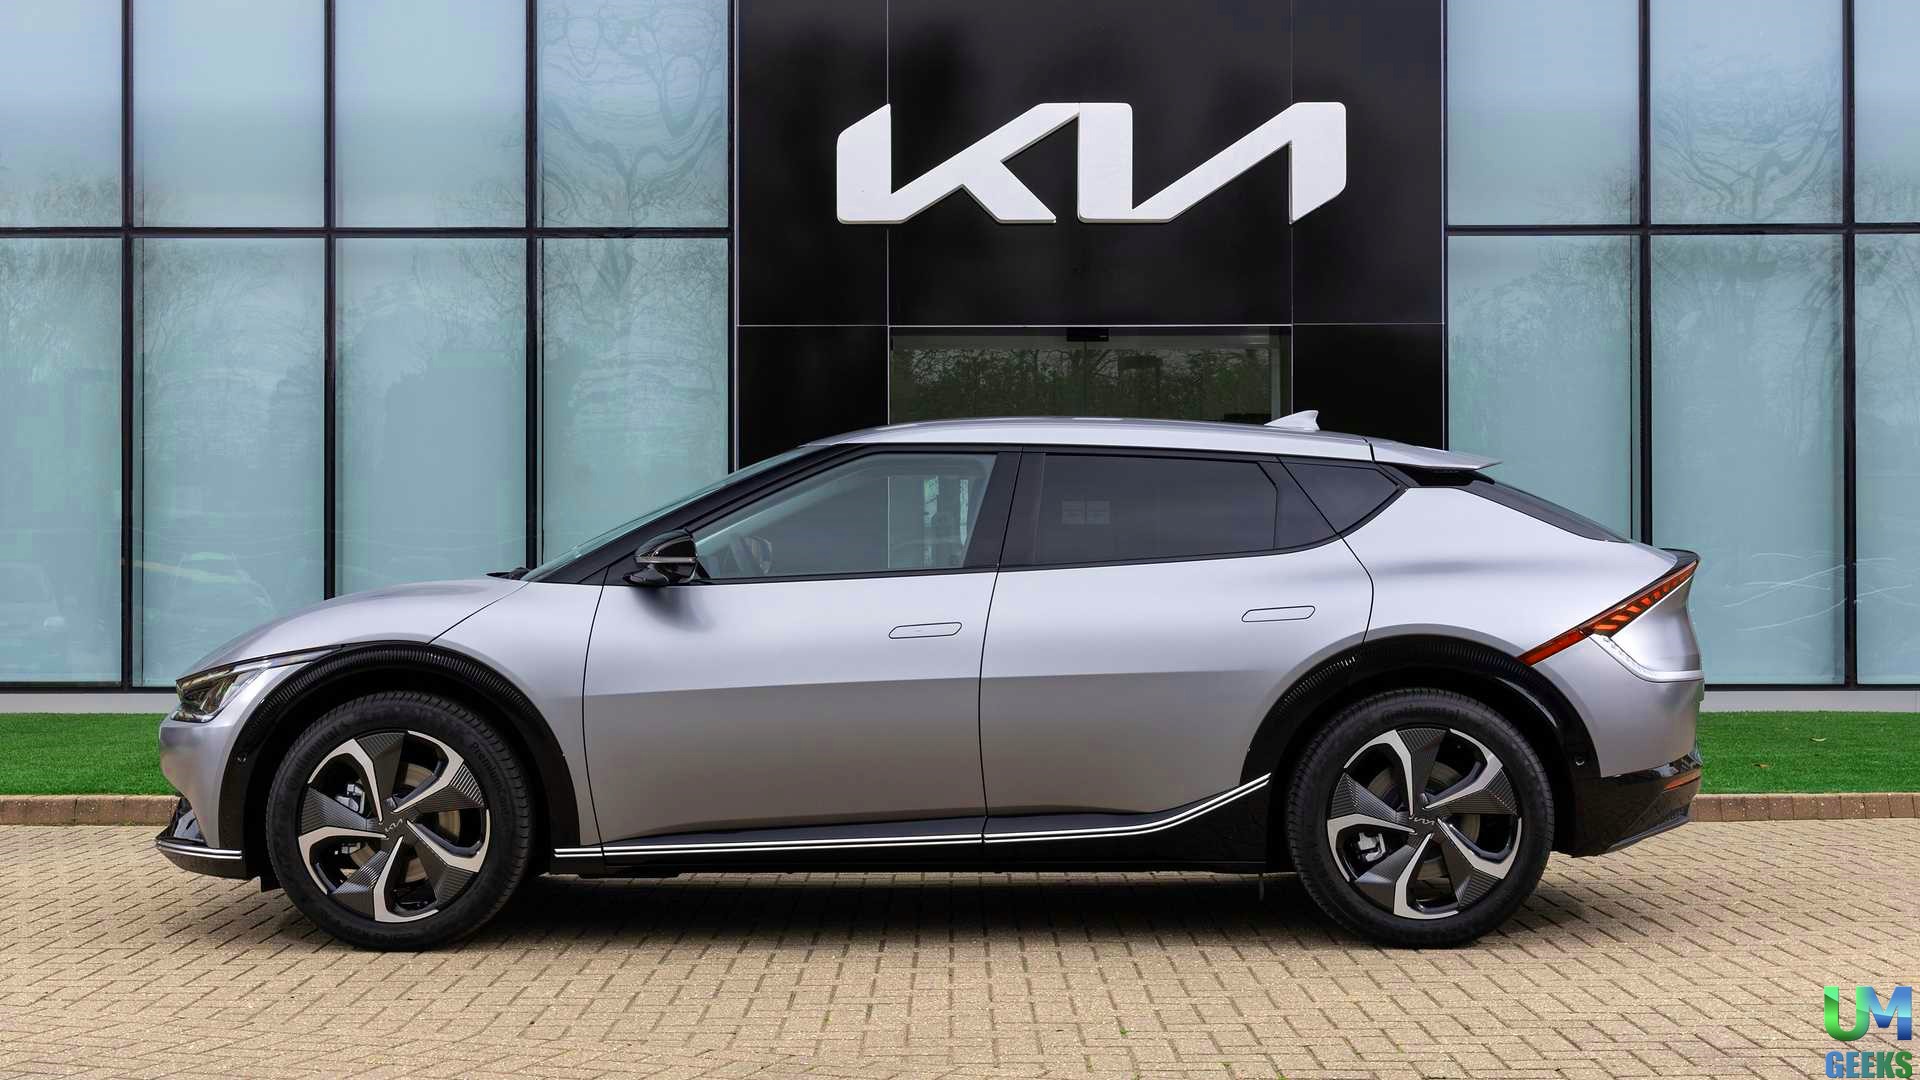 The of power and technology, the new electric car of “Kia”